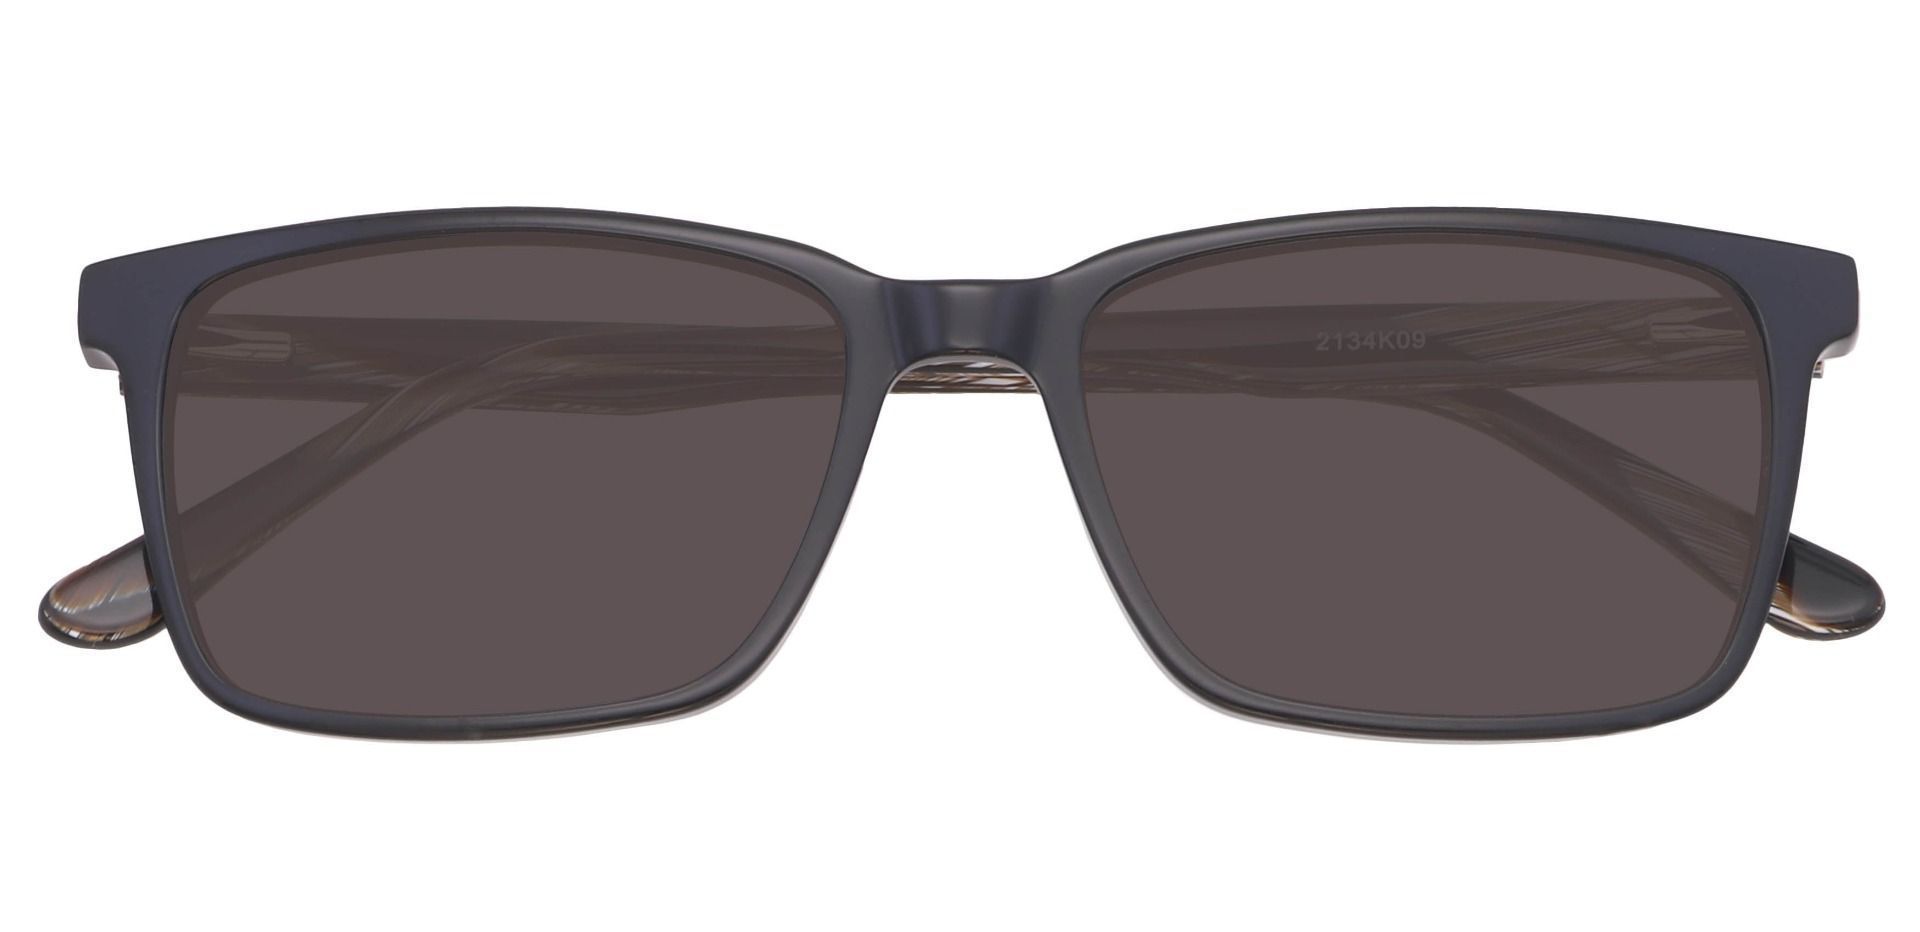 Venice Rectangle Lined Bifocal Sunglasses - Black Frame With Gray Lenses